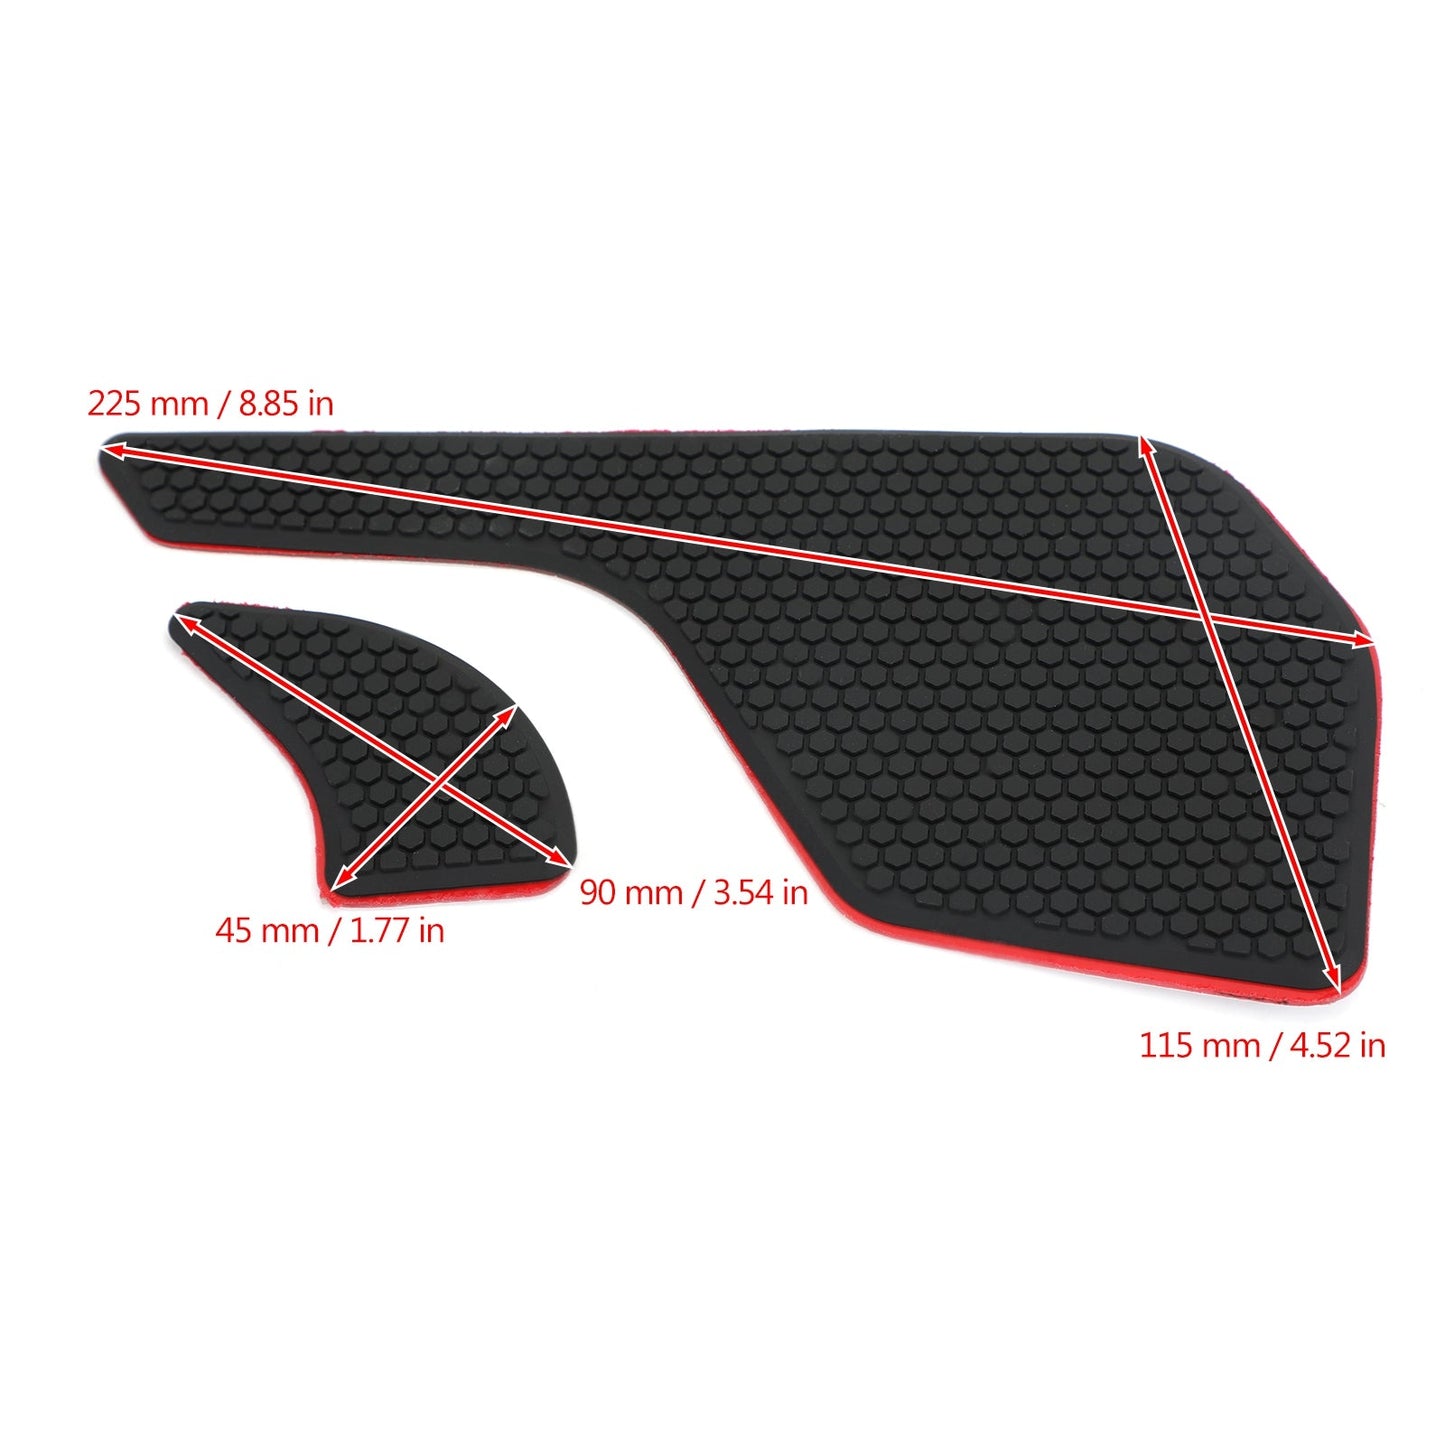 Tank Traction GRIPS Pads for TRIUMPH TIGER 800 XR/XRX/XRT XCX/XCA/XC 2015-2019